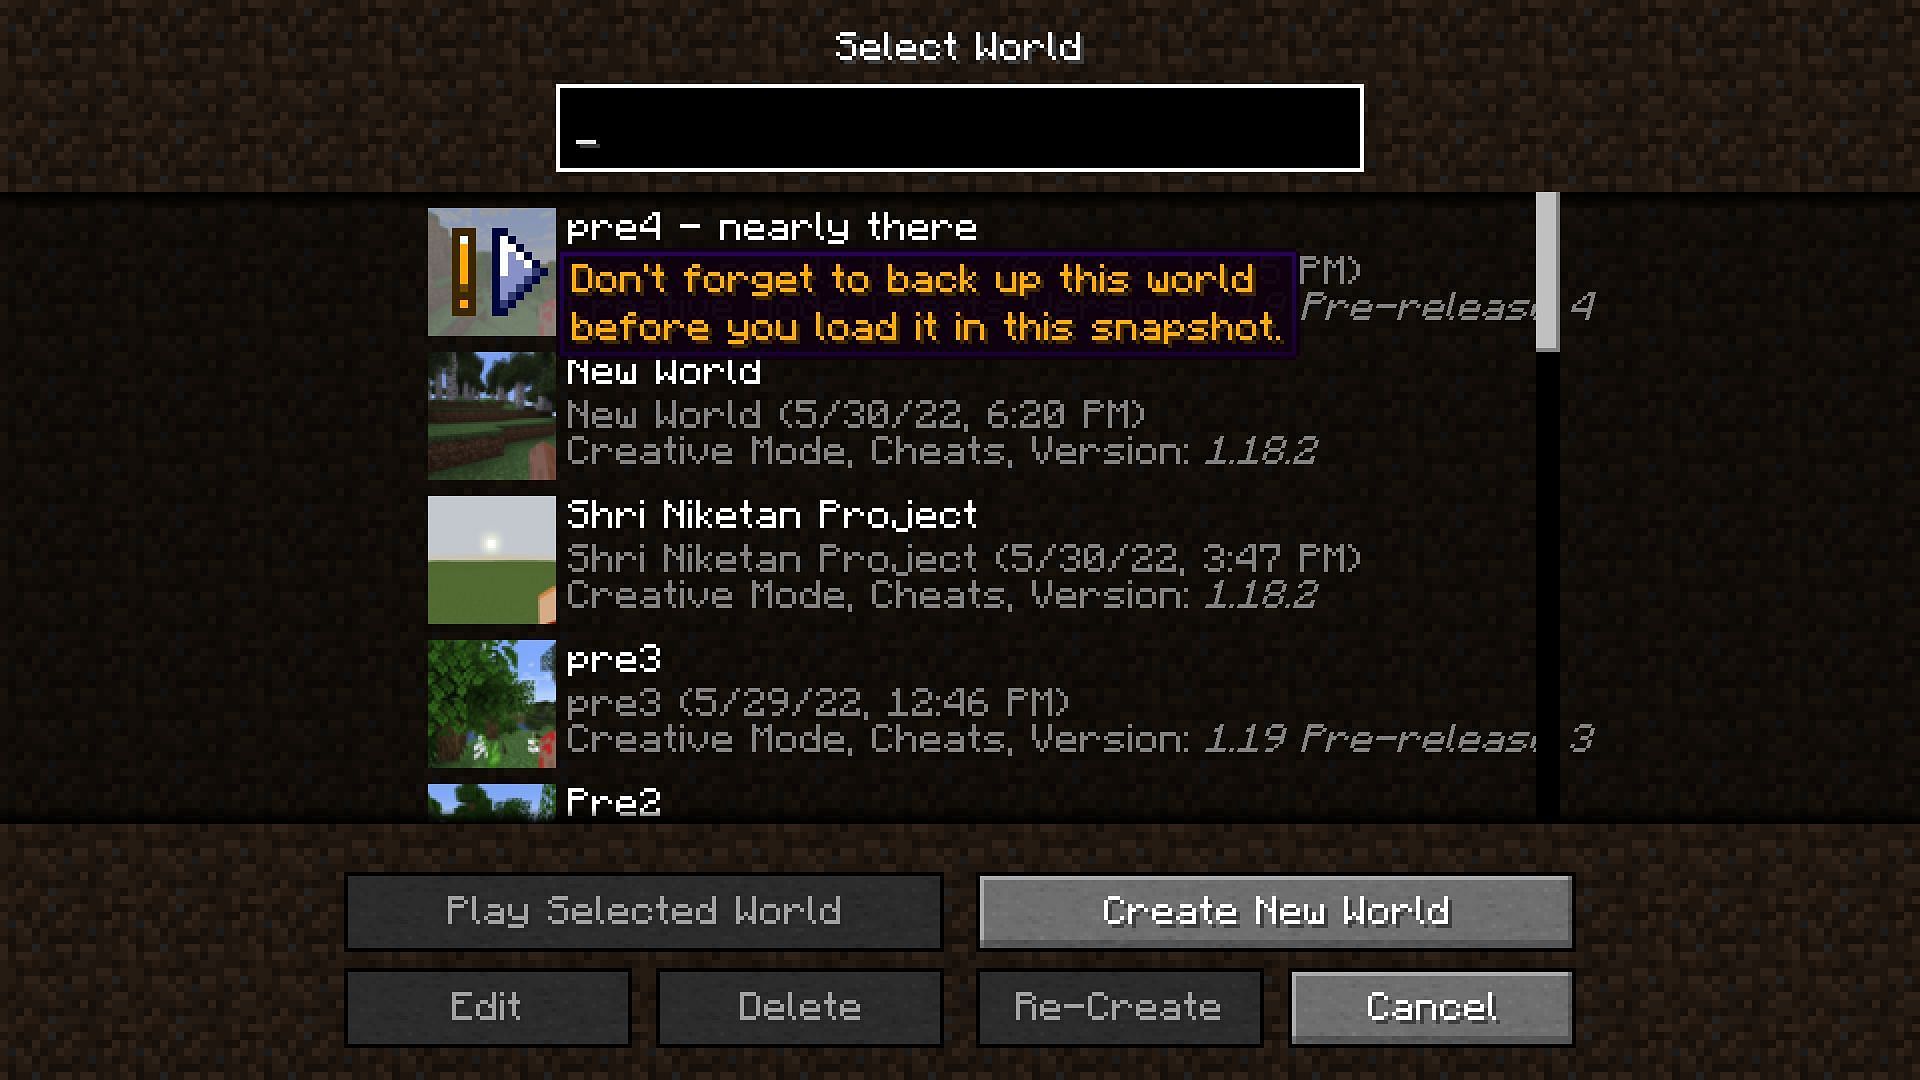 The existing worlds can be incompatible with pre-releases (Image via Minecraft)